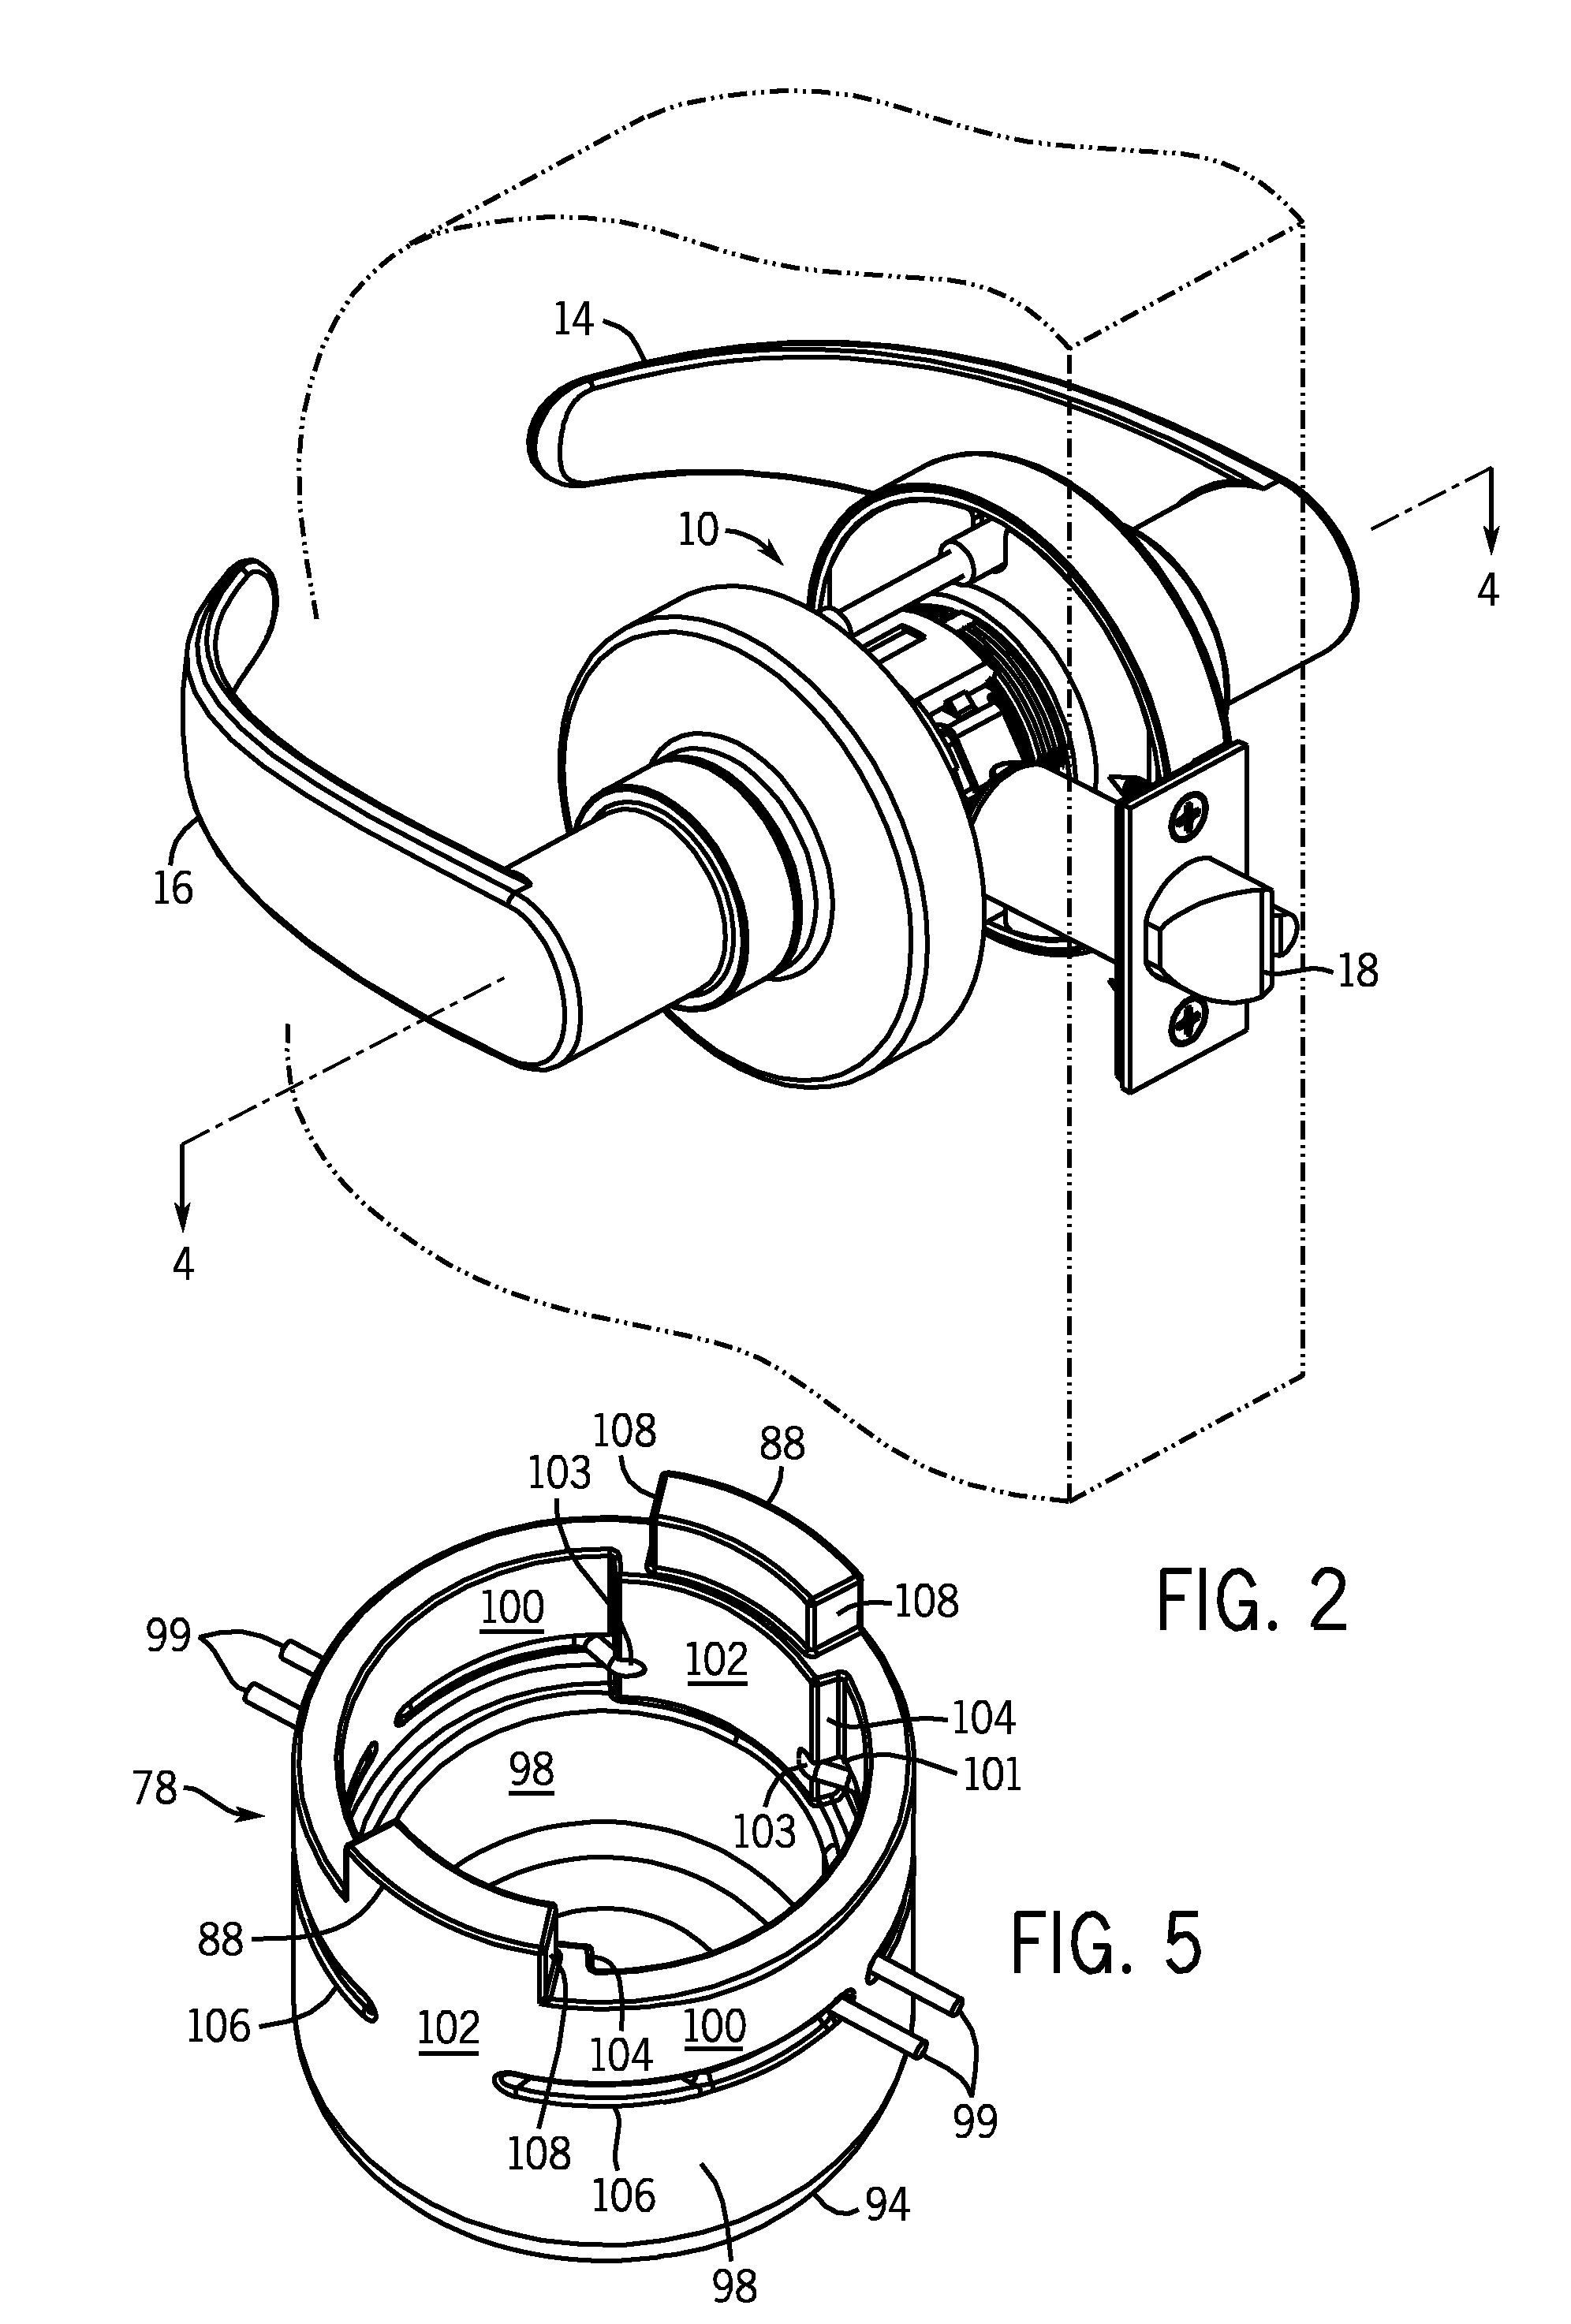 Electronic access control device